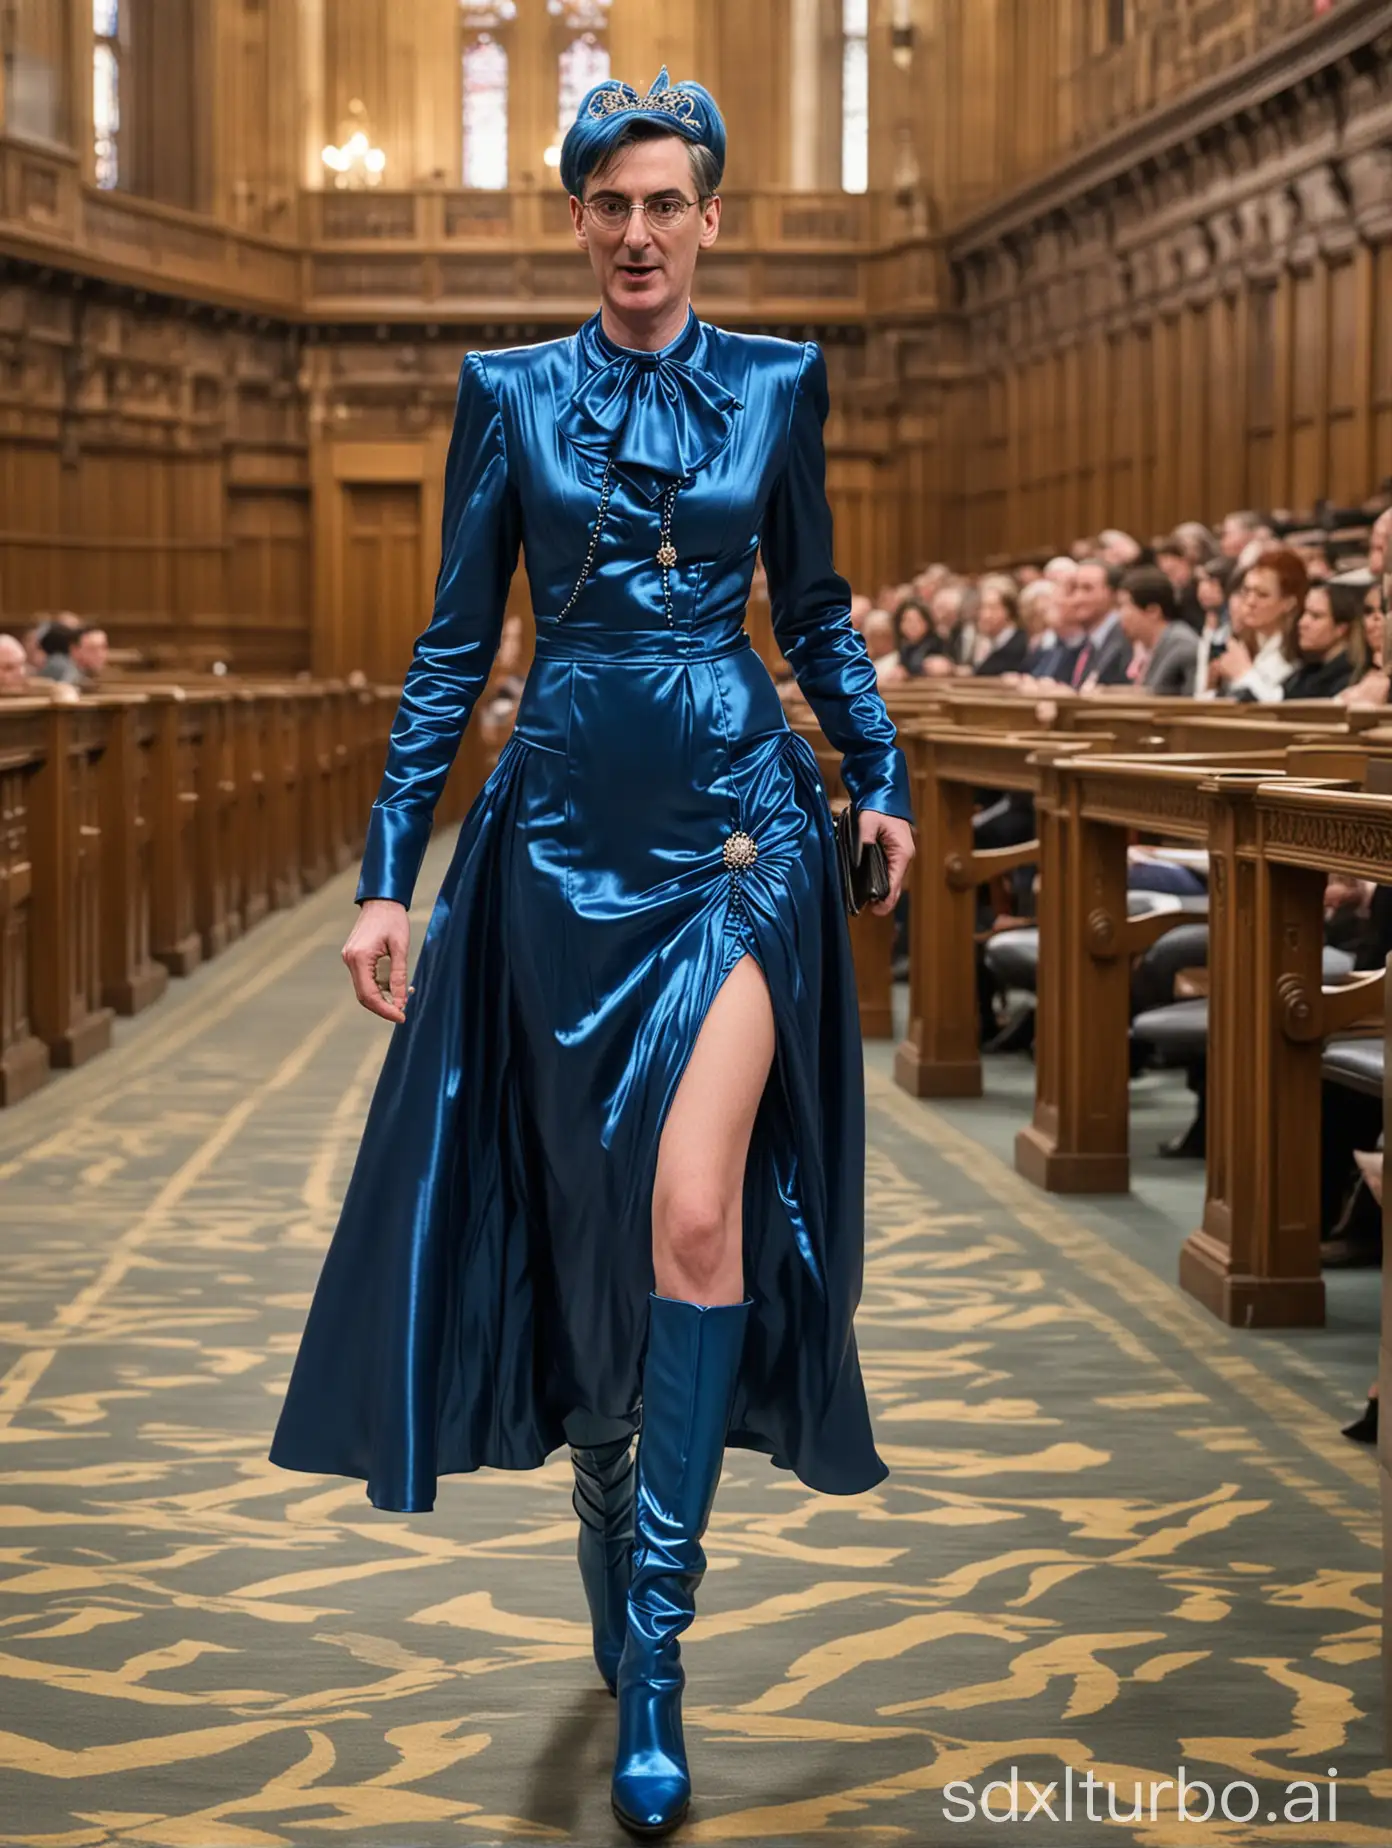 (((Political drag race))), photograph of british politician Jacob Rees-Mogg in a long elegant shiny silky blue drag queen dress and high heel boots walking in parliament